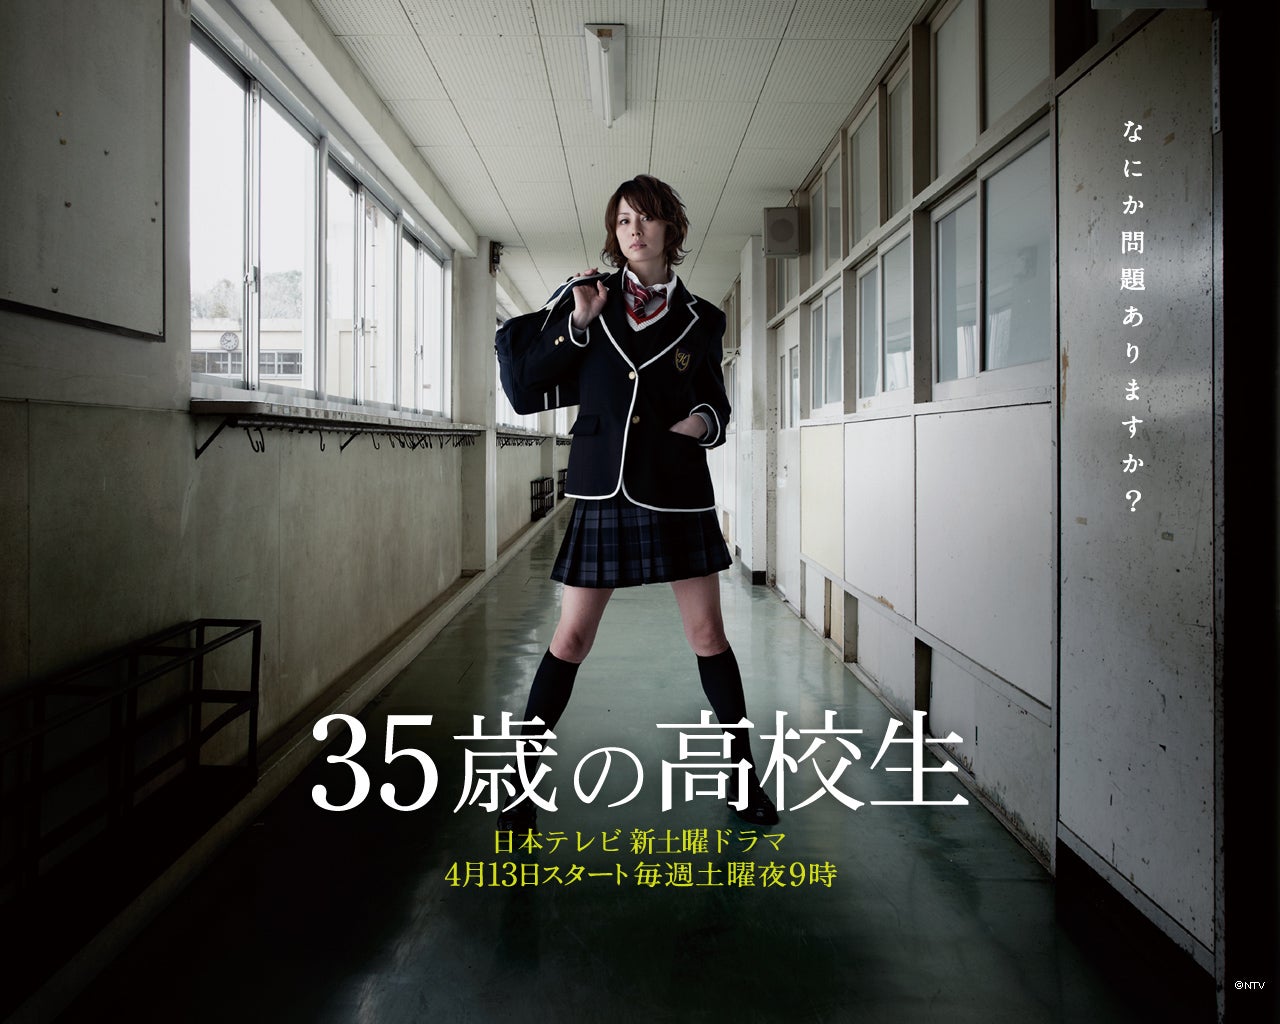 TV ratings for The 35 Year-old High School Student (35歳の高校生) in France. NTV TV series